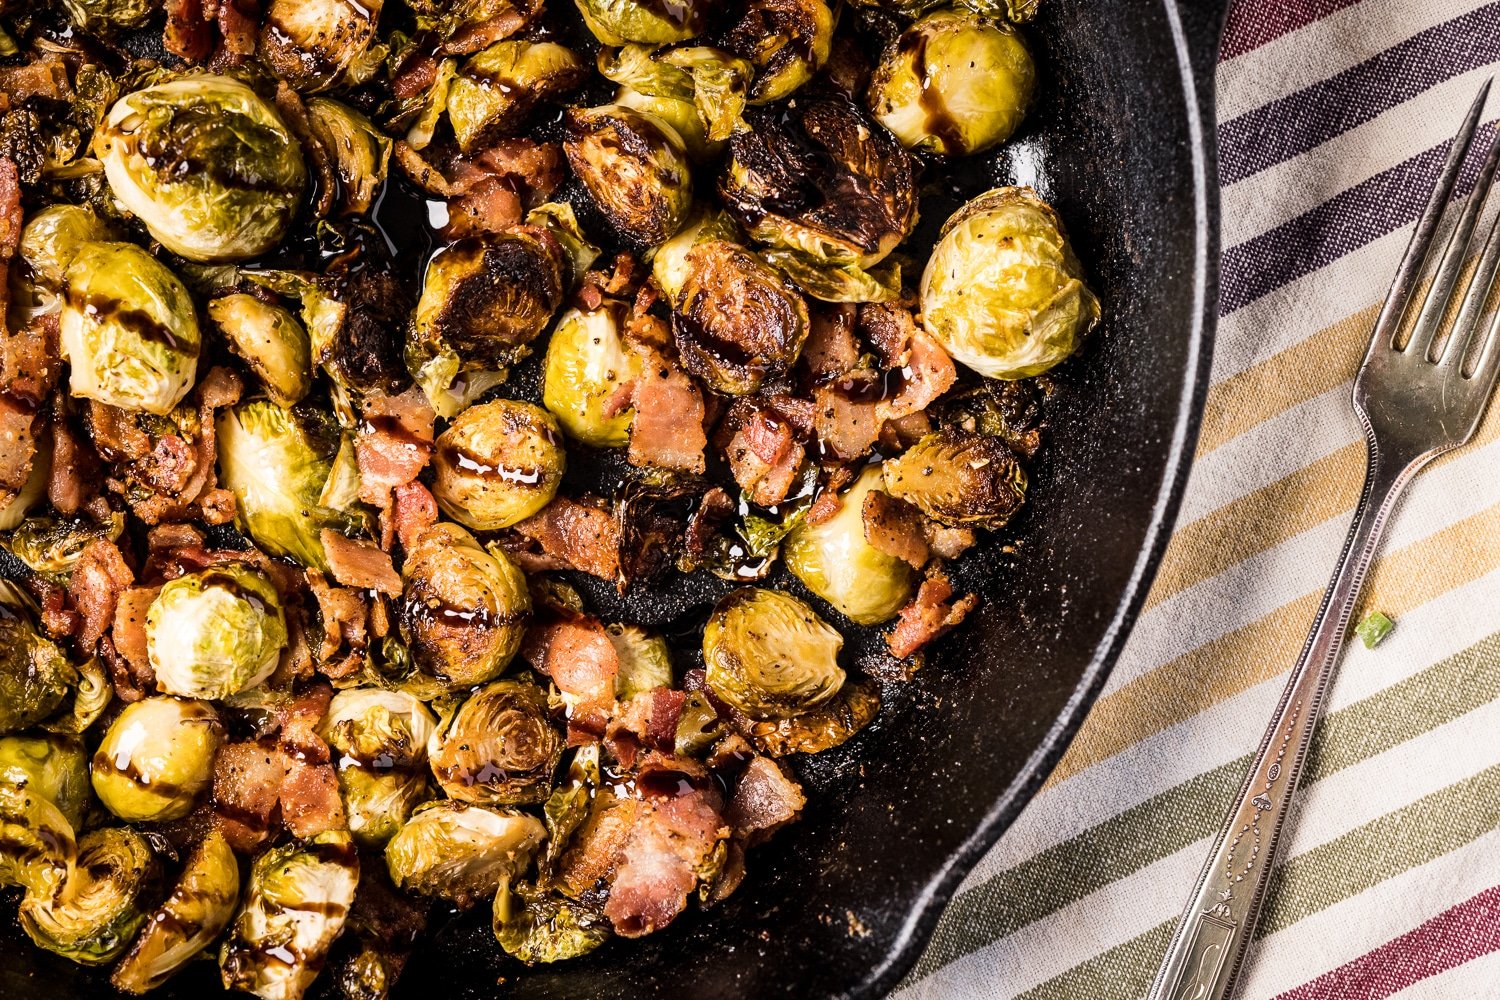 Skillet of glazed smoked Brussels sprouts.